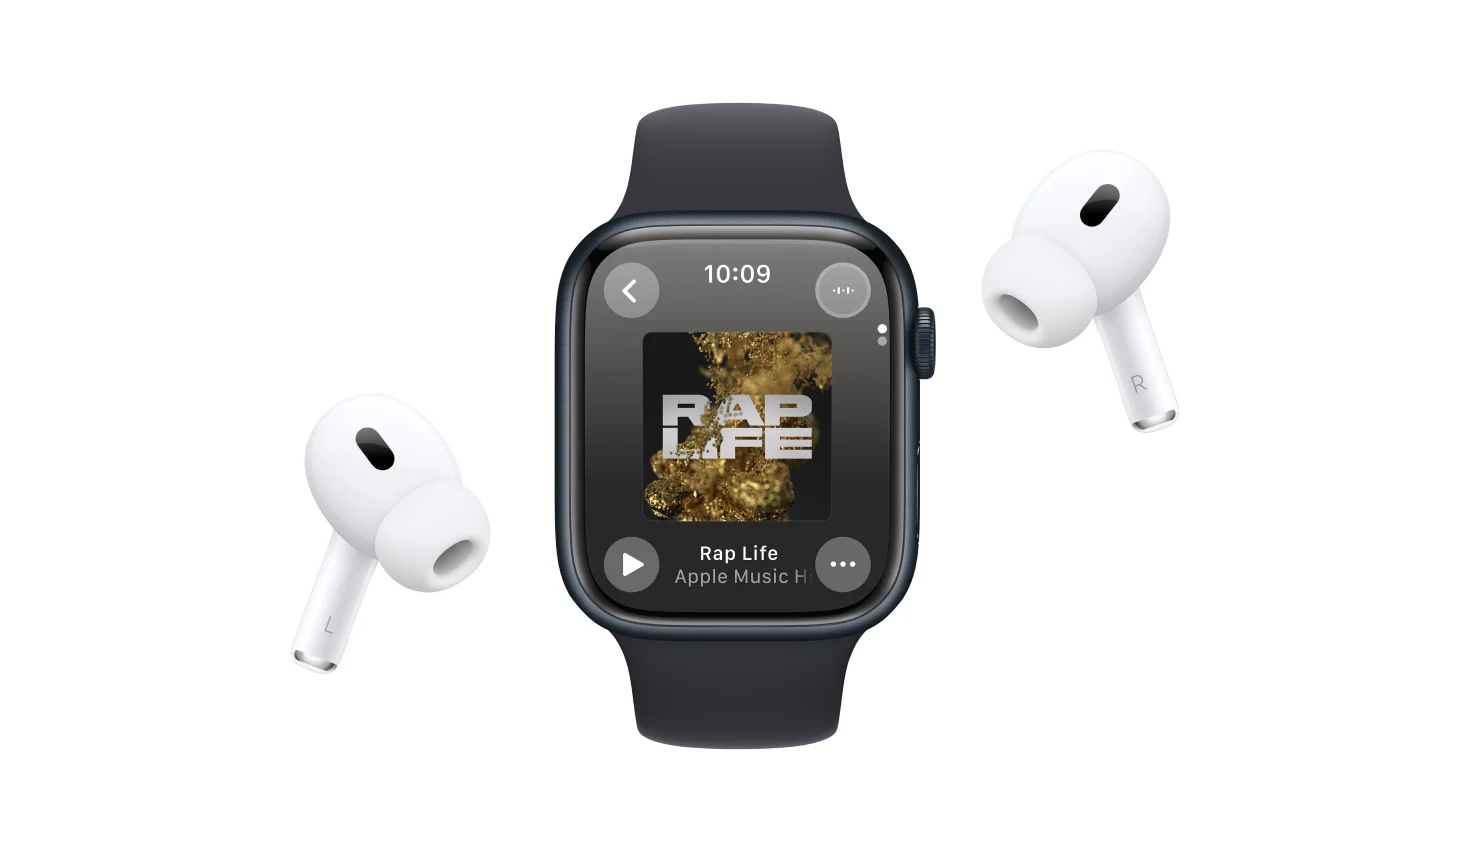 A Midnight Aluminium Apple Watch 9 showcases Apple Music on its display, with a pair of AirPods Pro (2nd gen) on either side.